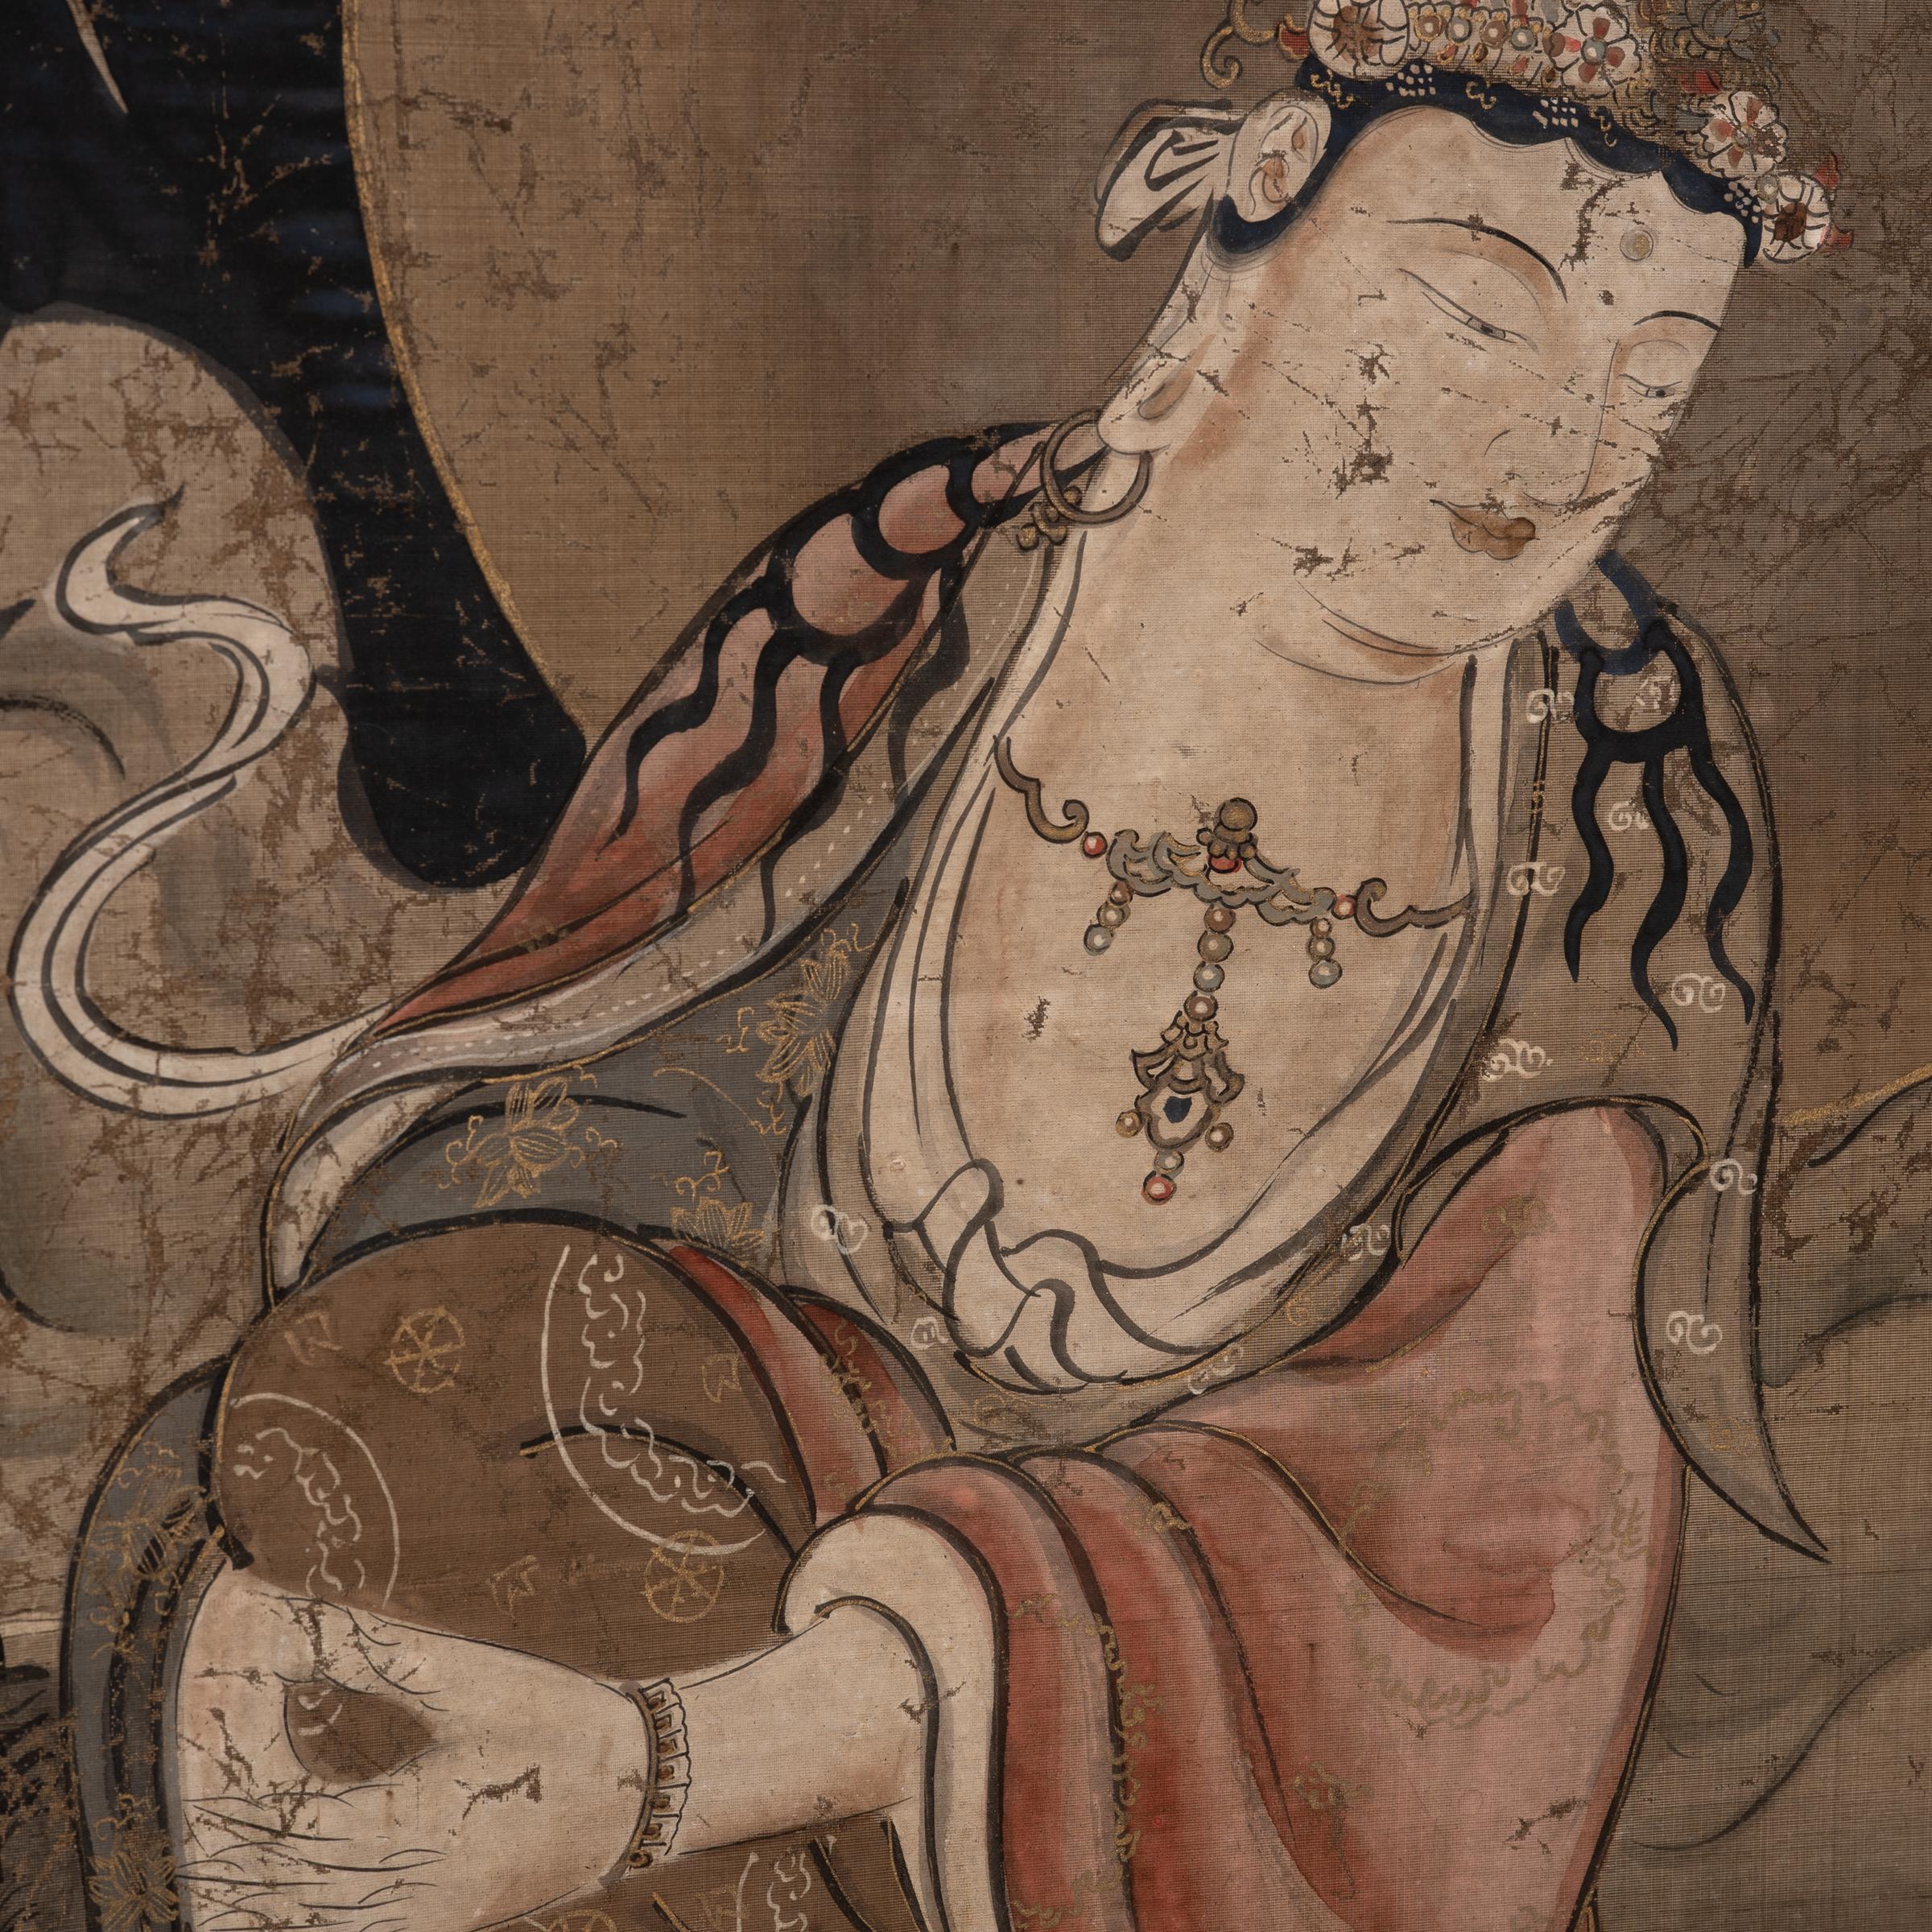 This exquisite hanging scroll painting from the late 18th century depicts the sacred form of the bodhisattva Guanyin, known in Japanese Buddhism as Shō Kannon, or Guze Kannon. Described as the 